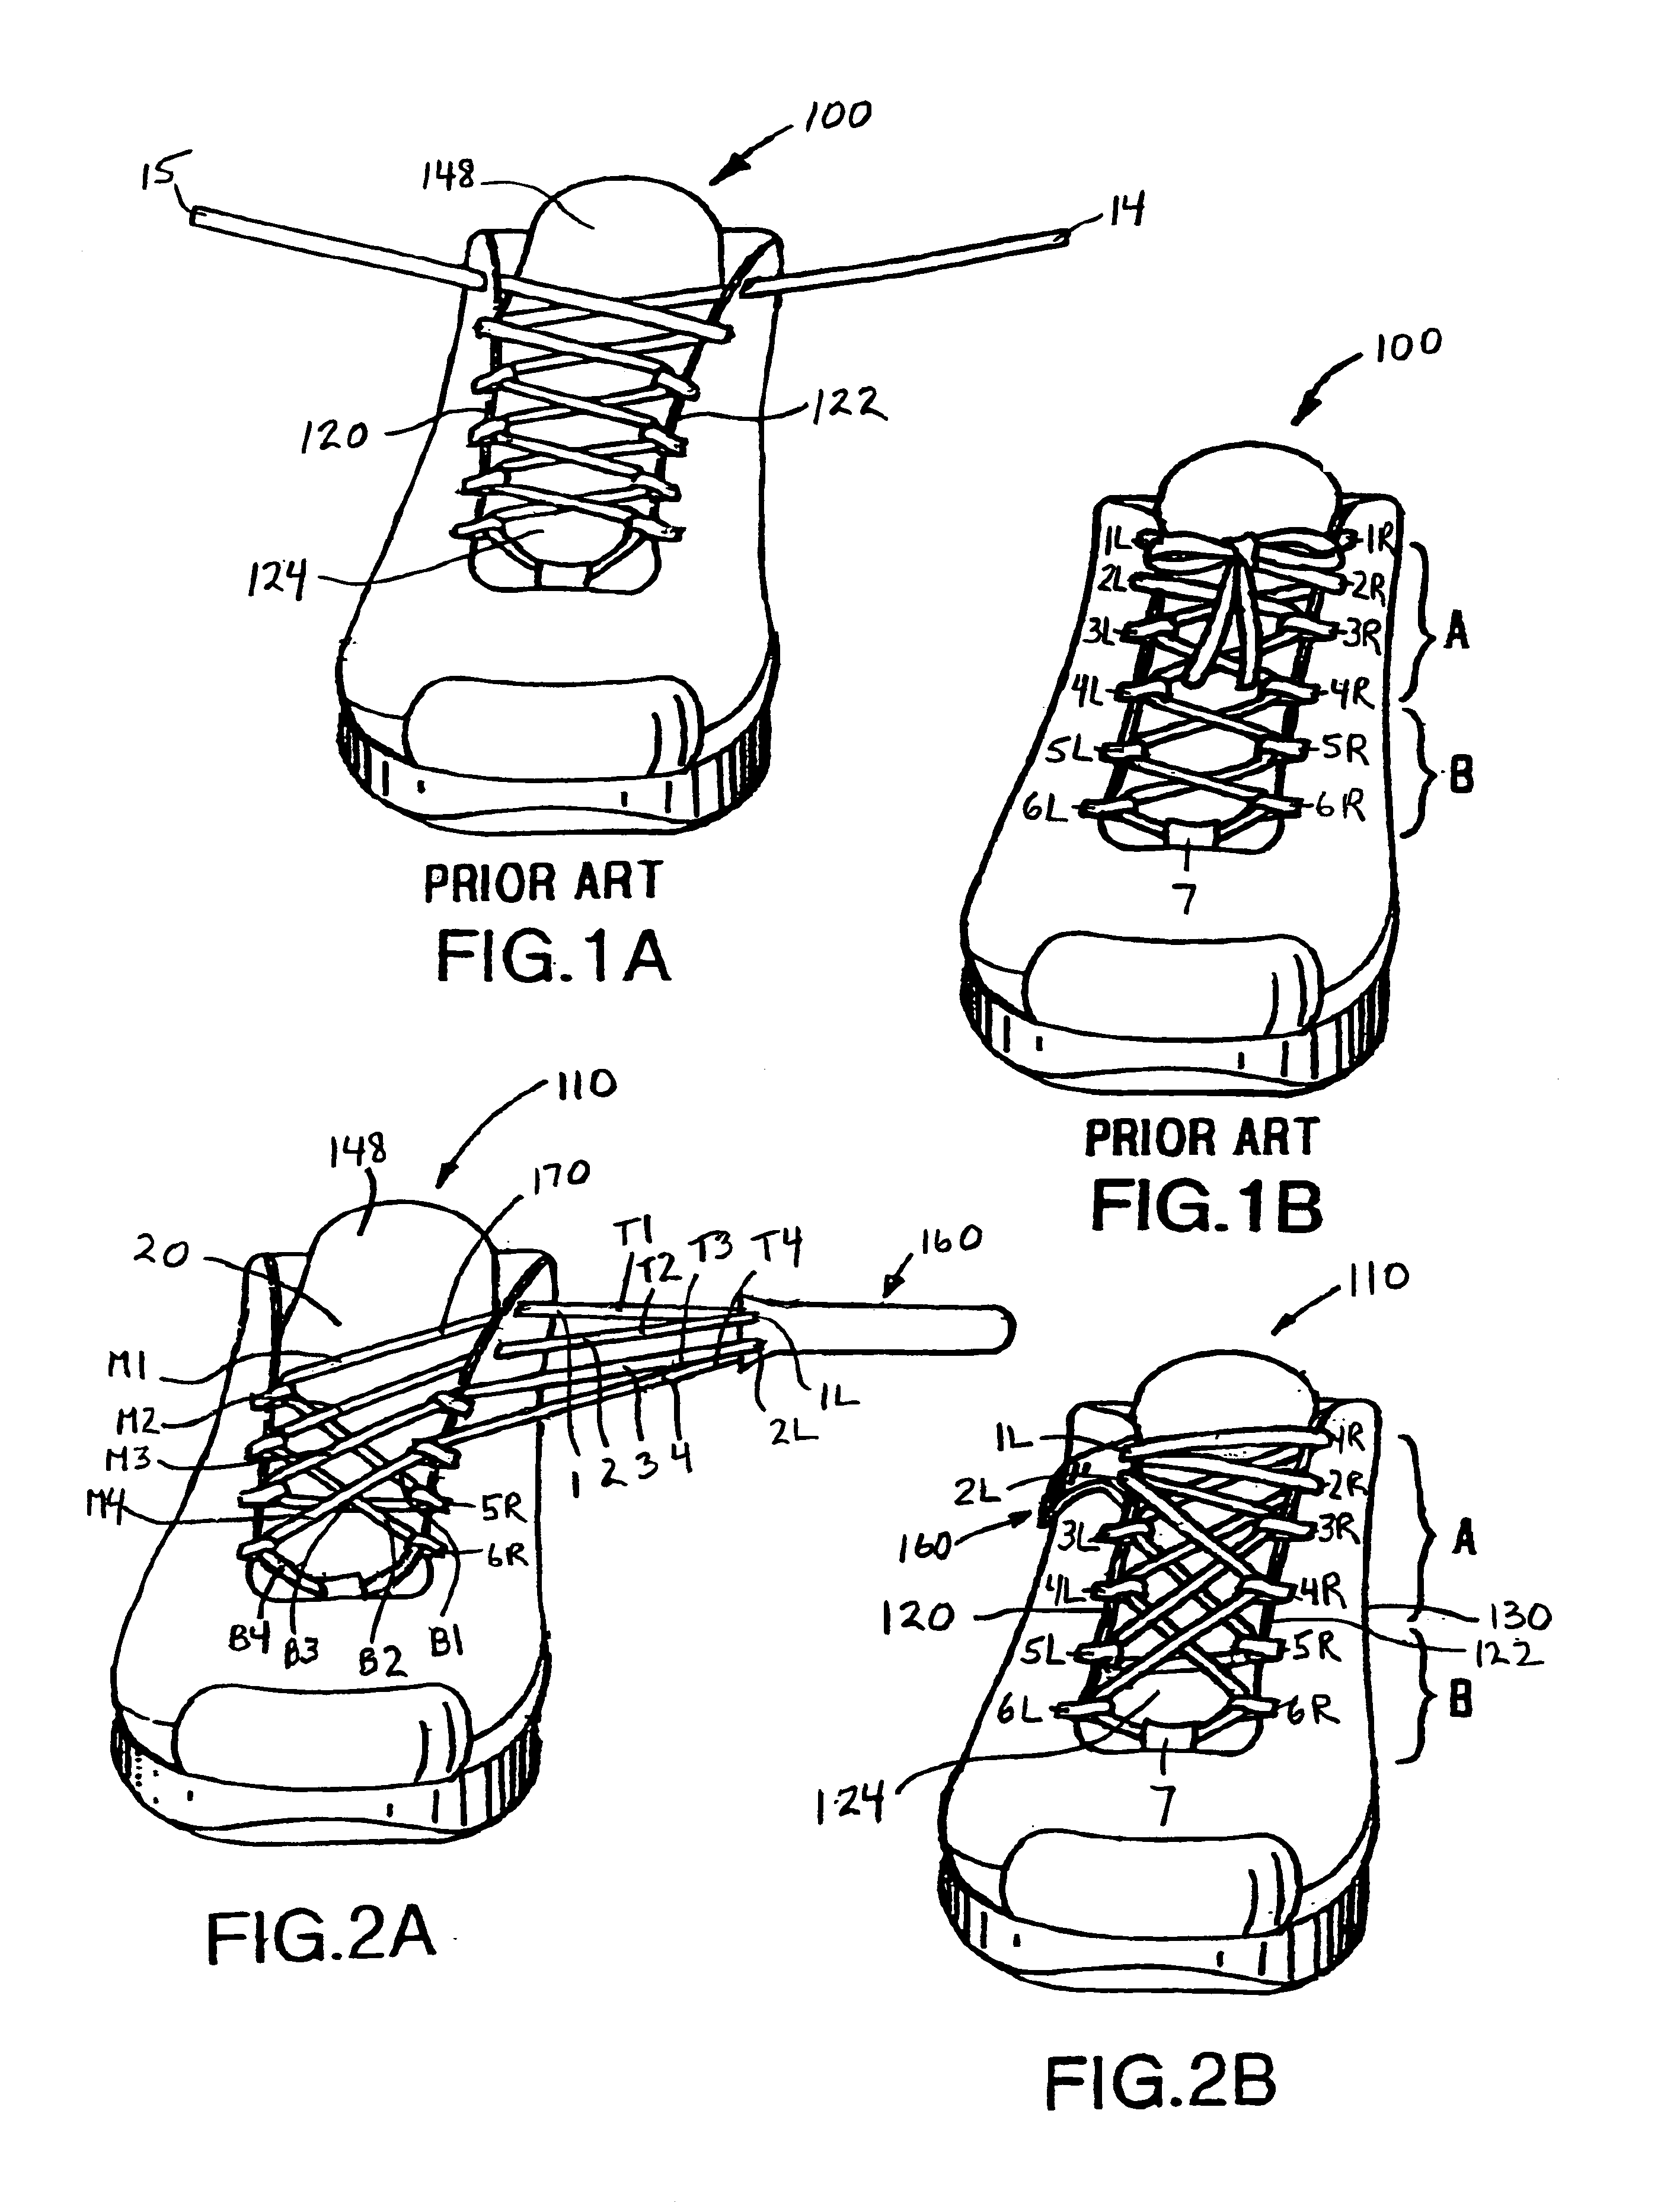 Lacing system